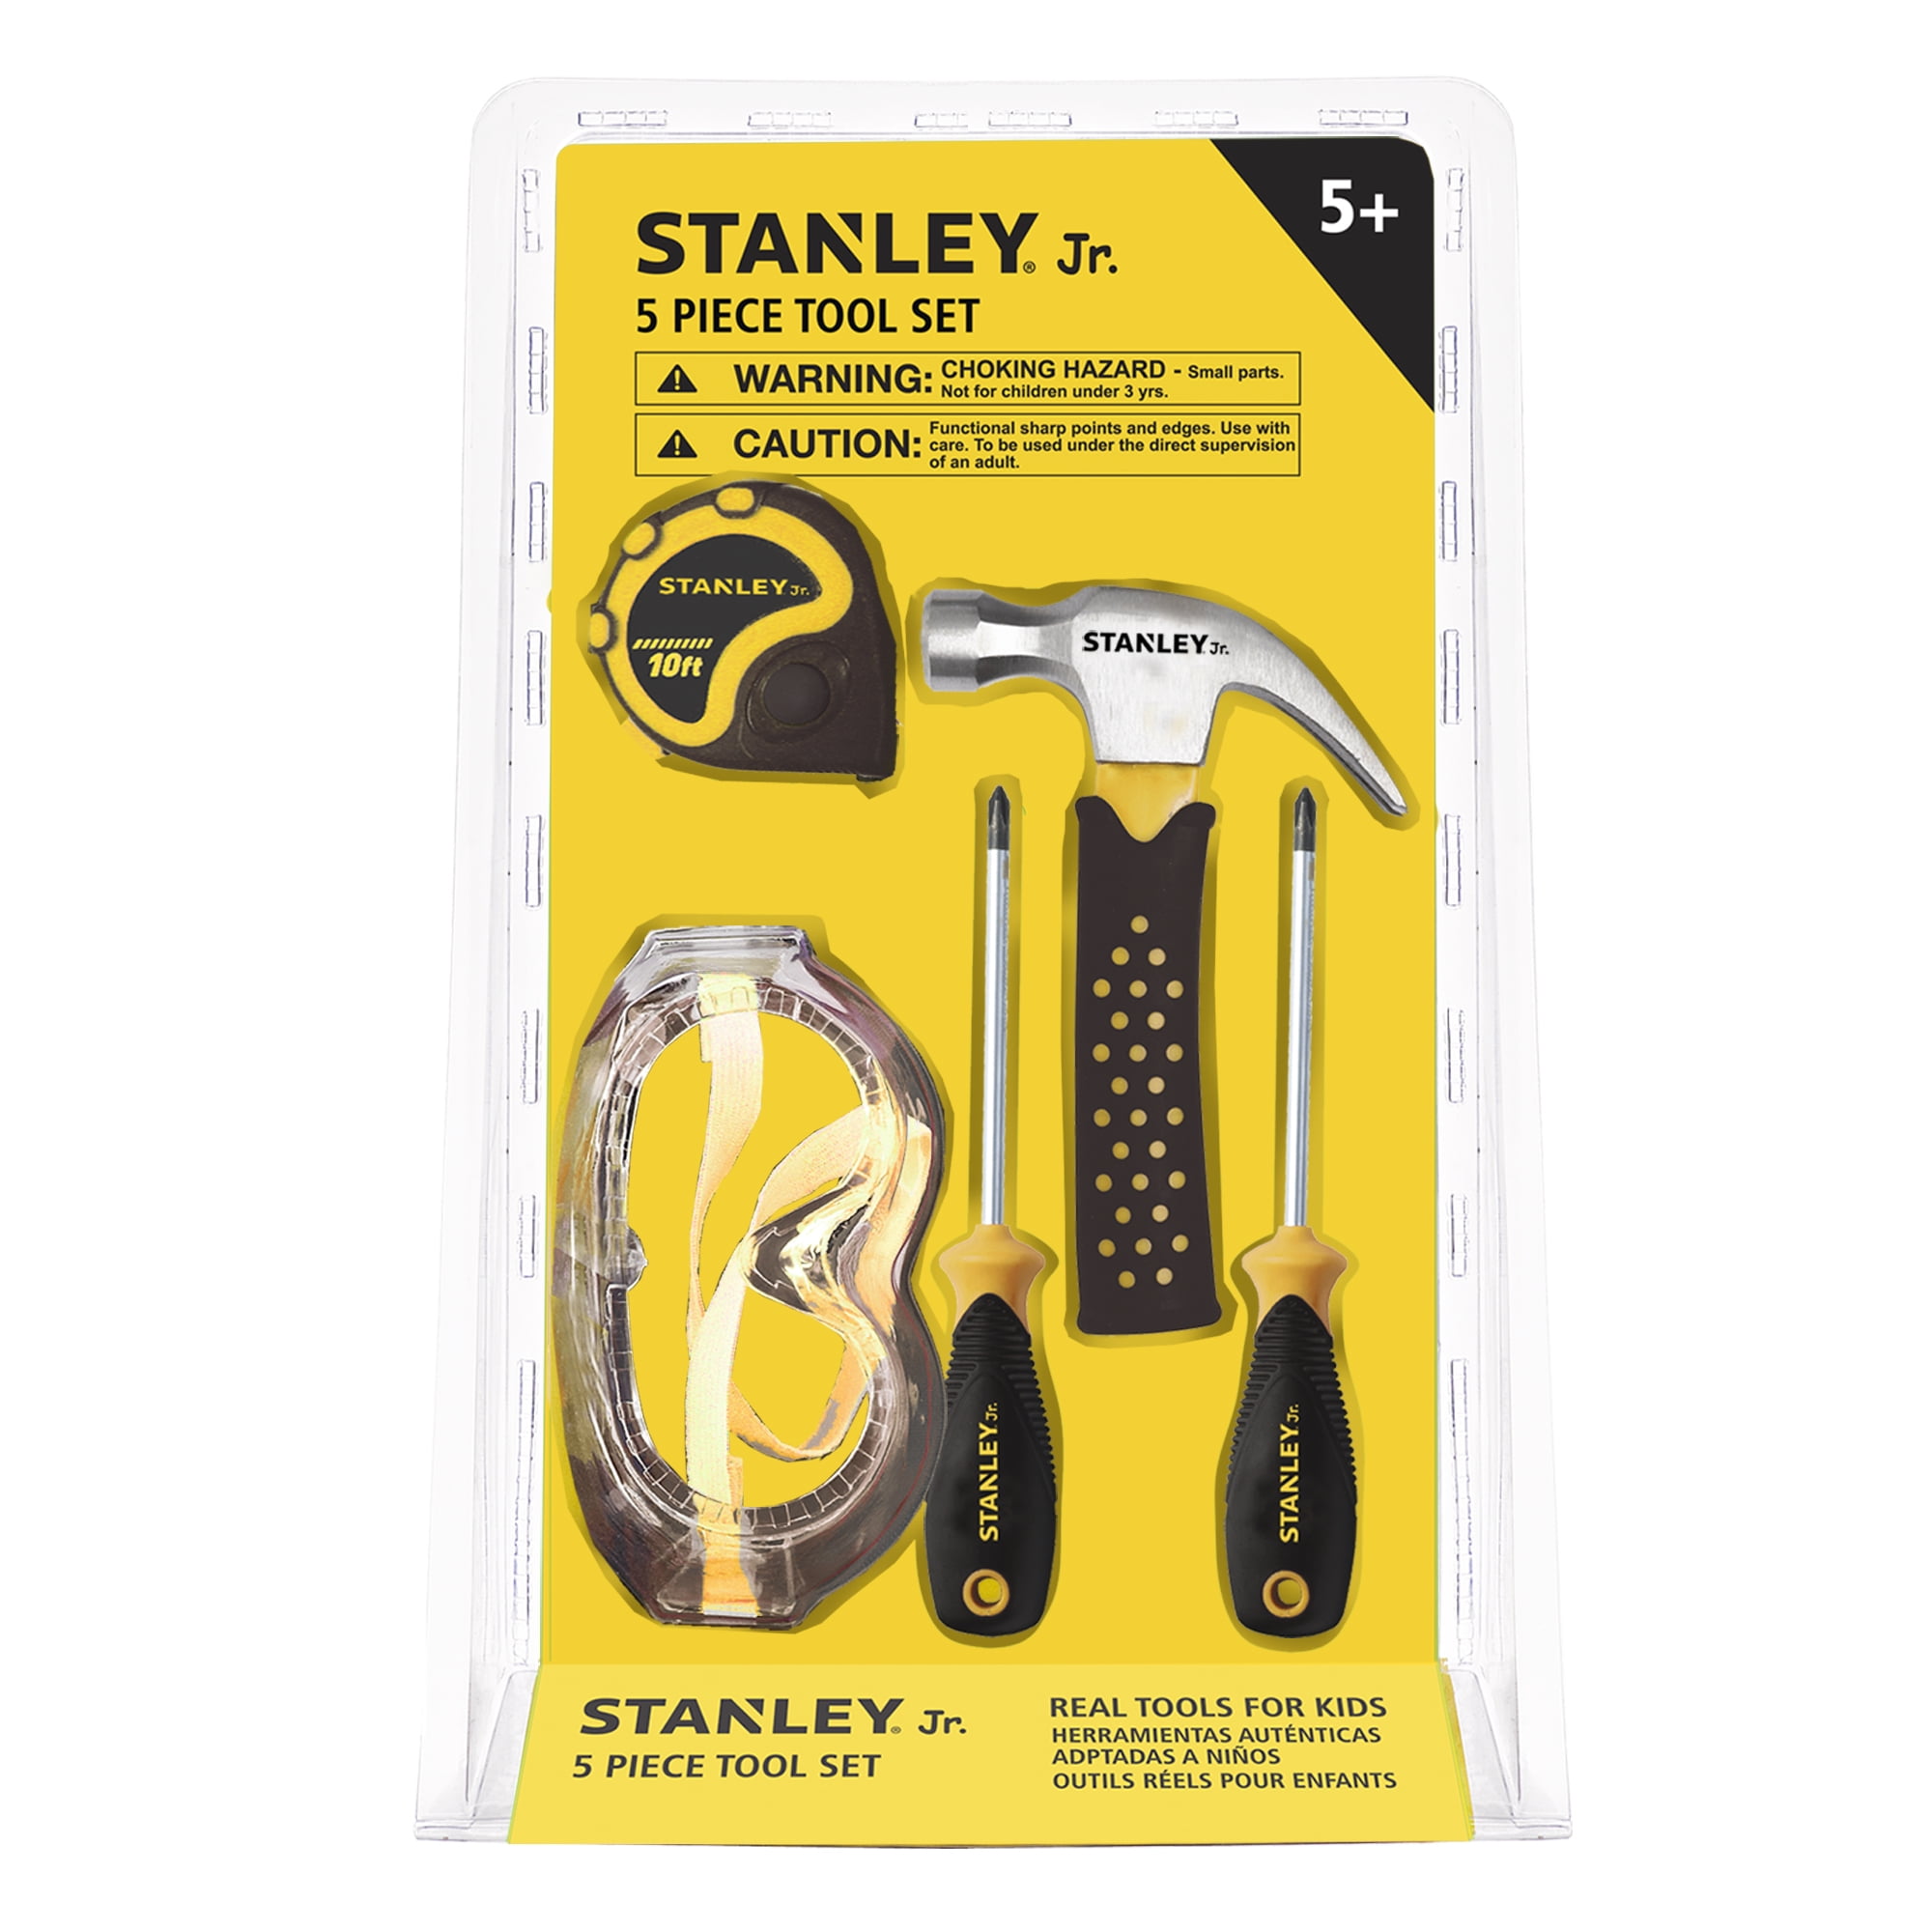 Stanley Jr Construction tool set BRAND NEW Toy 